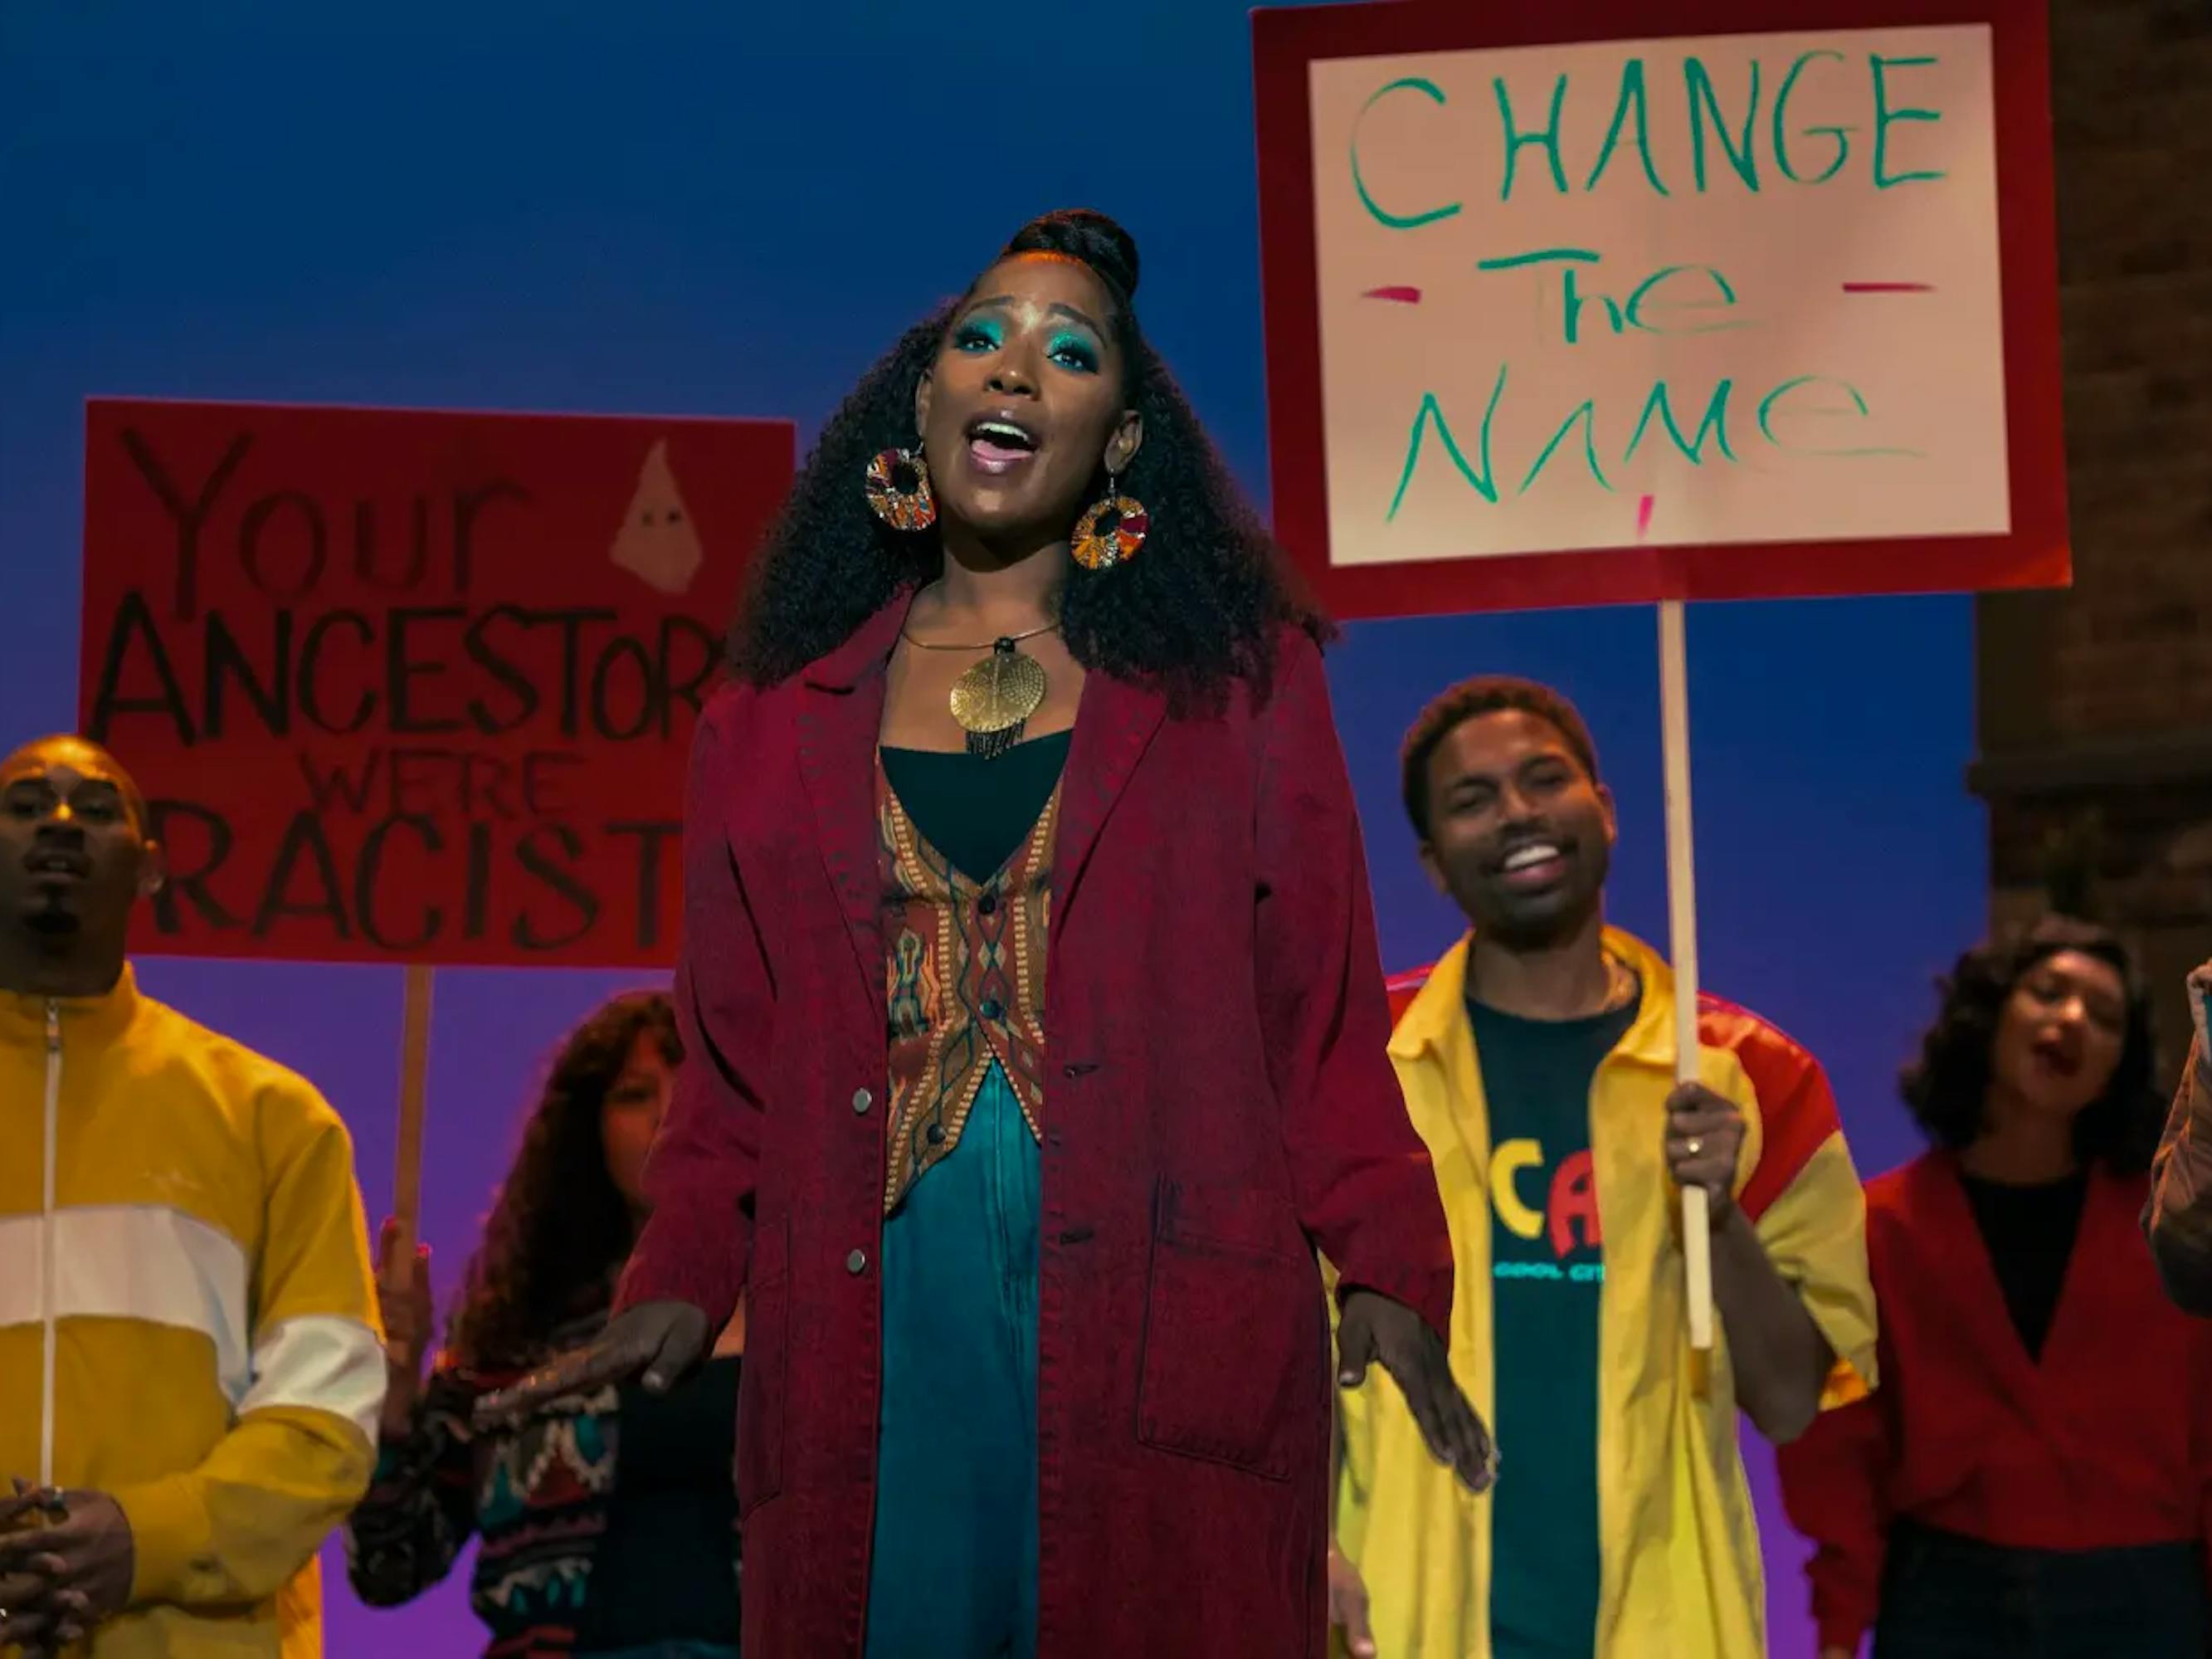 Joelle Brooks (Ashley Blaine Featherson) wears a red coat as she leads a group of people holding signs that read: ‘Your ancestors were racist’ and ‘change the name.’